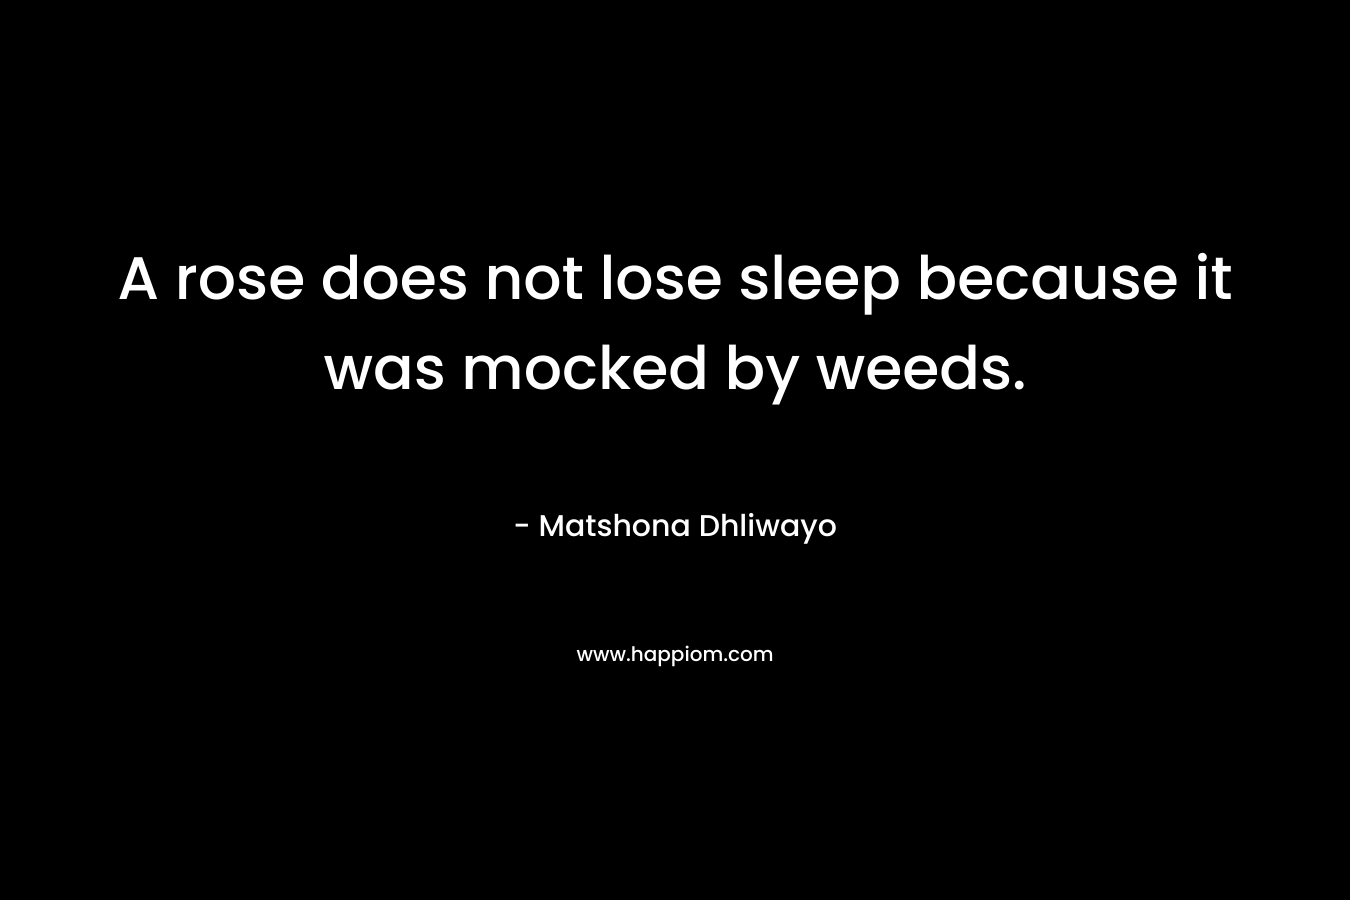 A rose does not lose sleep because it was mocked by weeds.